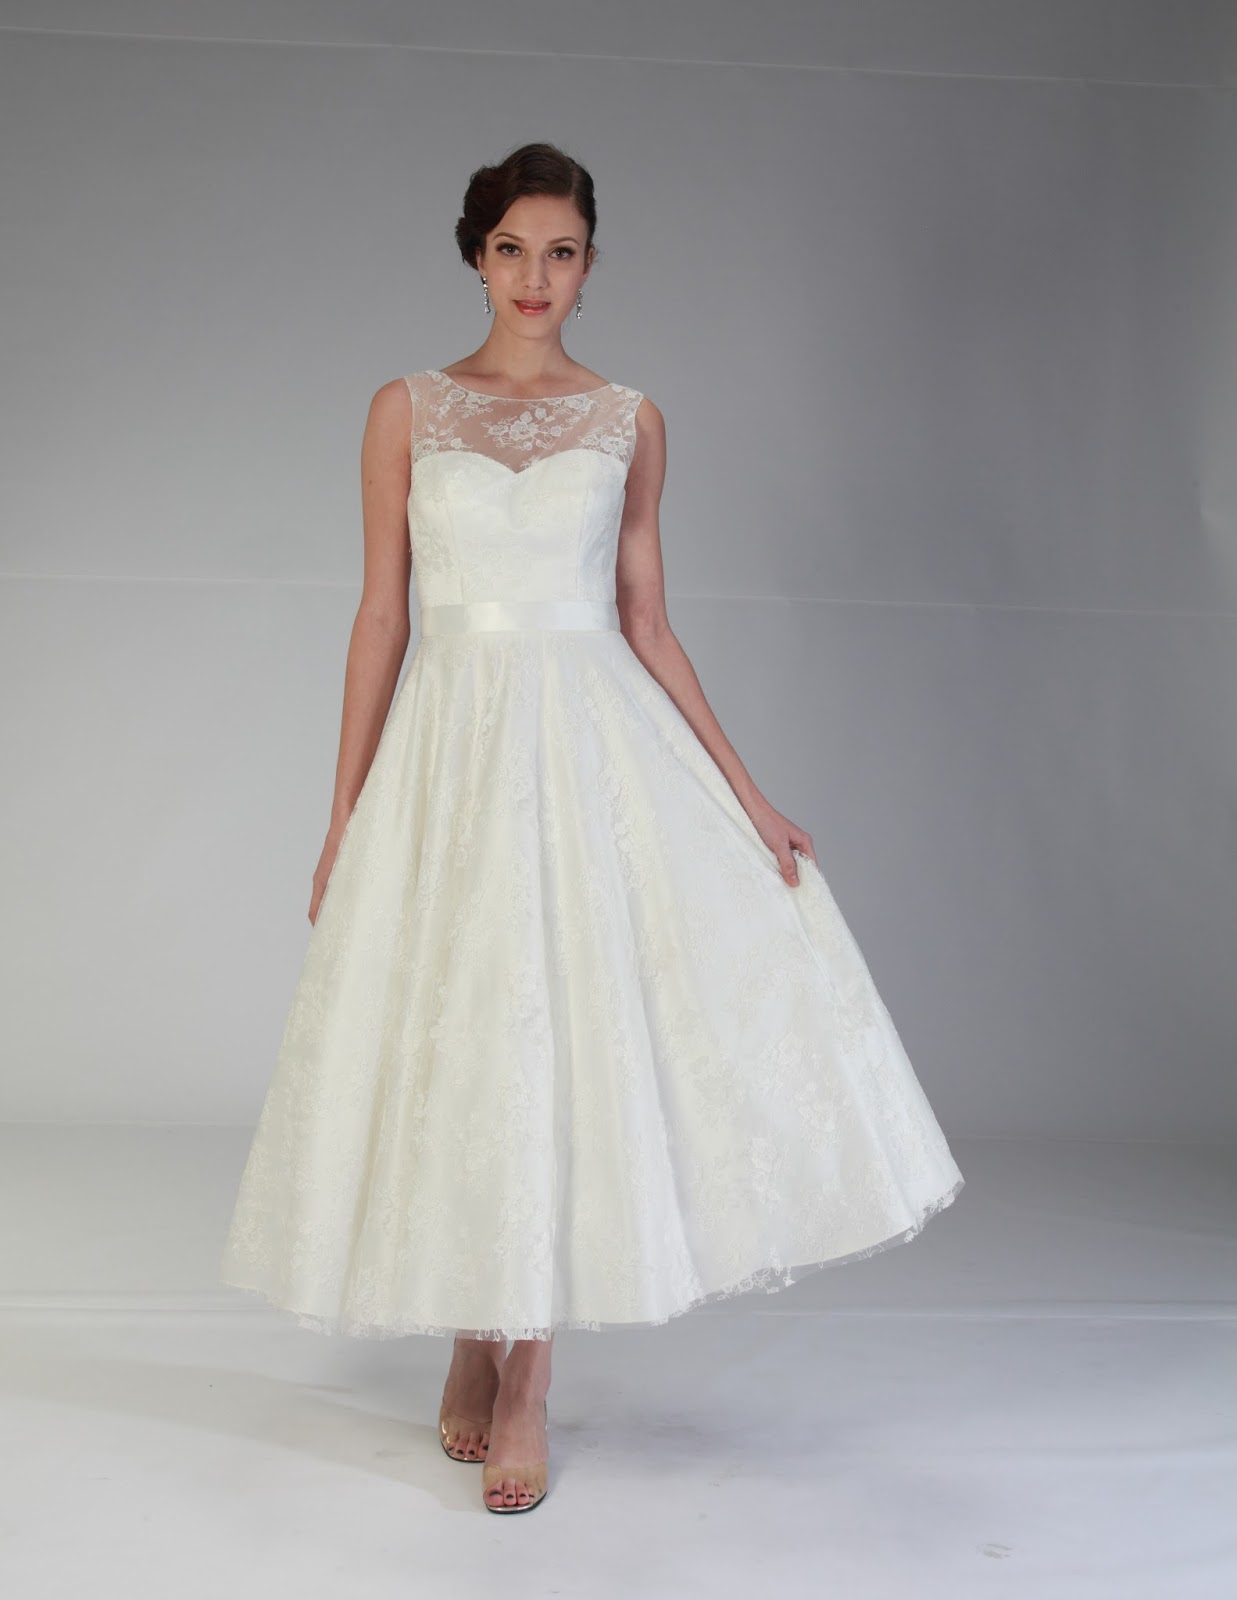 Choosing The Best Wedding Dress for a Civil Wedding Ceremony - Mother